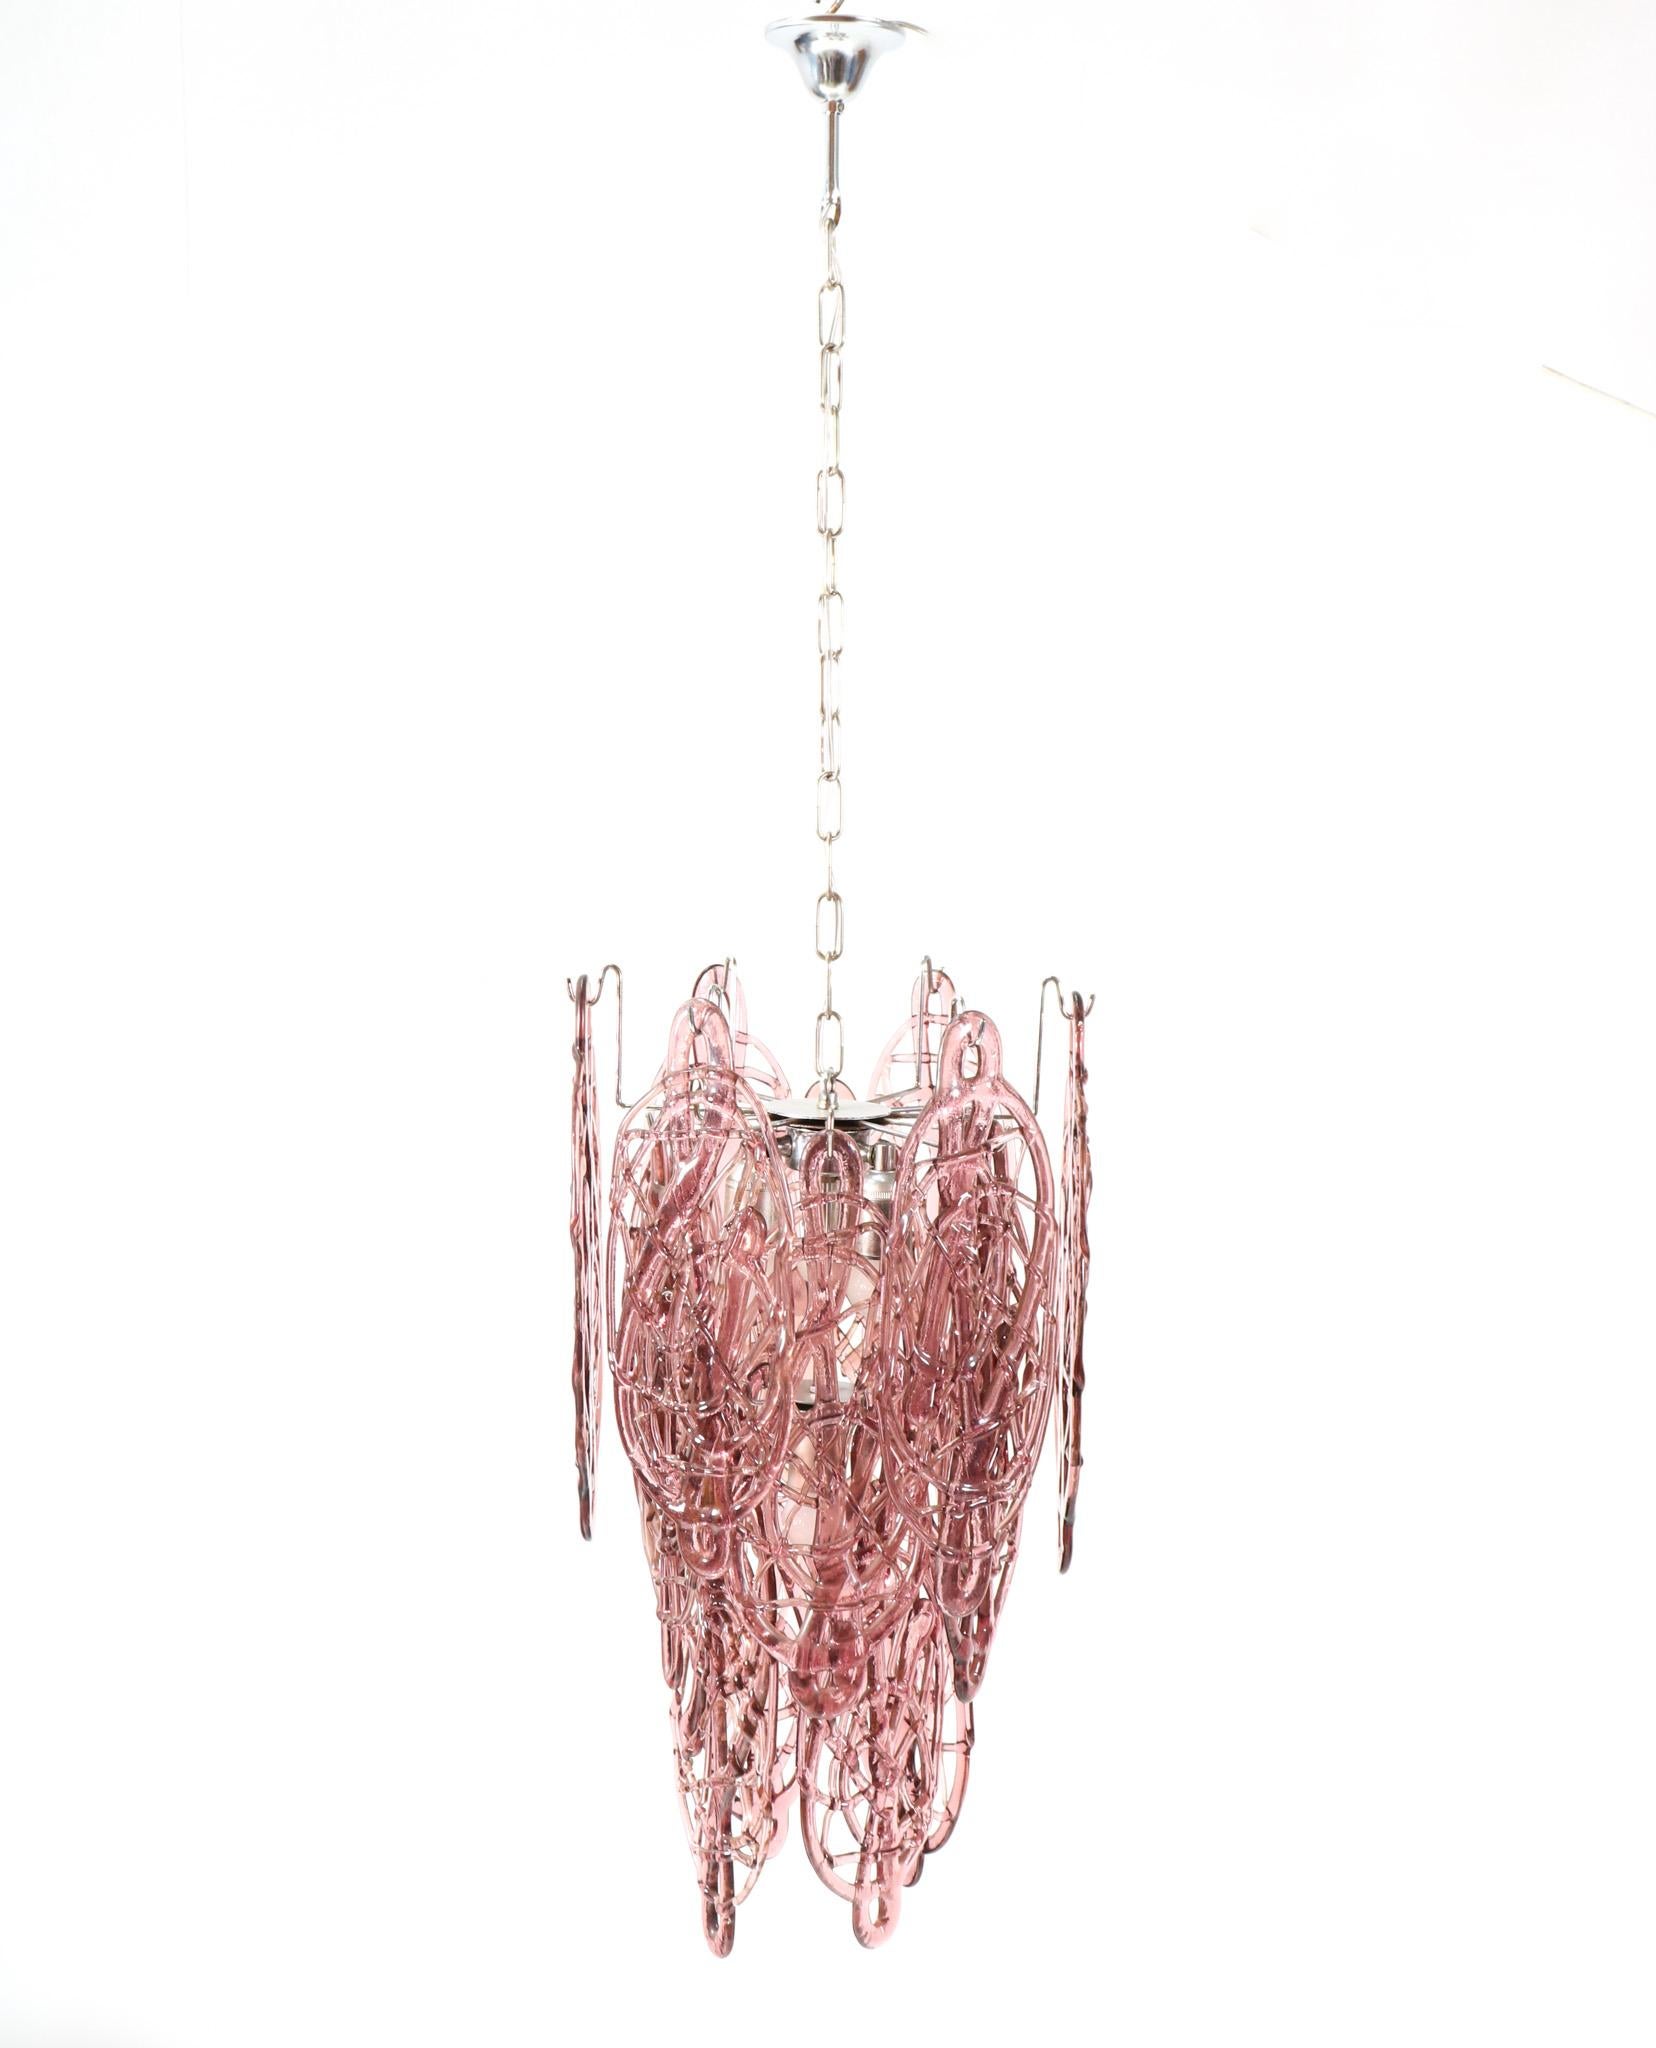 Magnificent and rare Mid-Century Modern Model Spider Web pendant lamp.
Design by Gino Vistosi for Vetrerie Mazzega Murano.
Striking Italian design from the 1960s.
Original chrome-plated steel frame with original hand-made cast purple glass